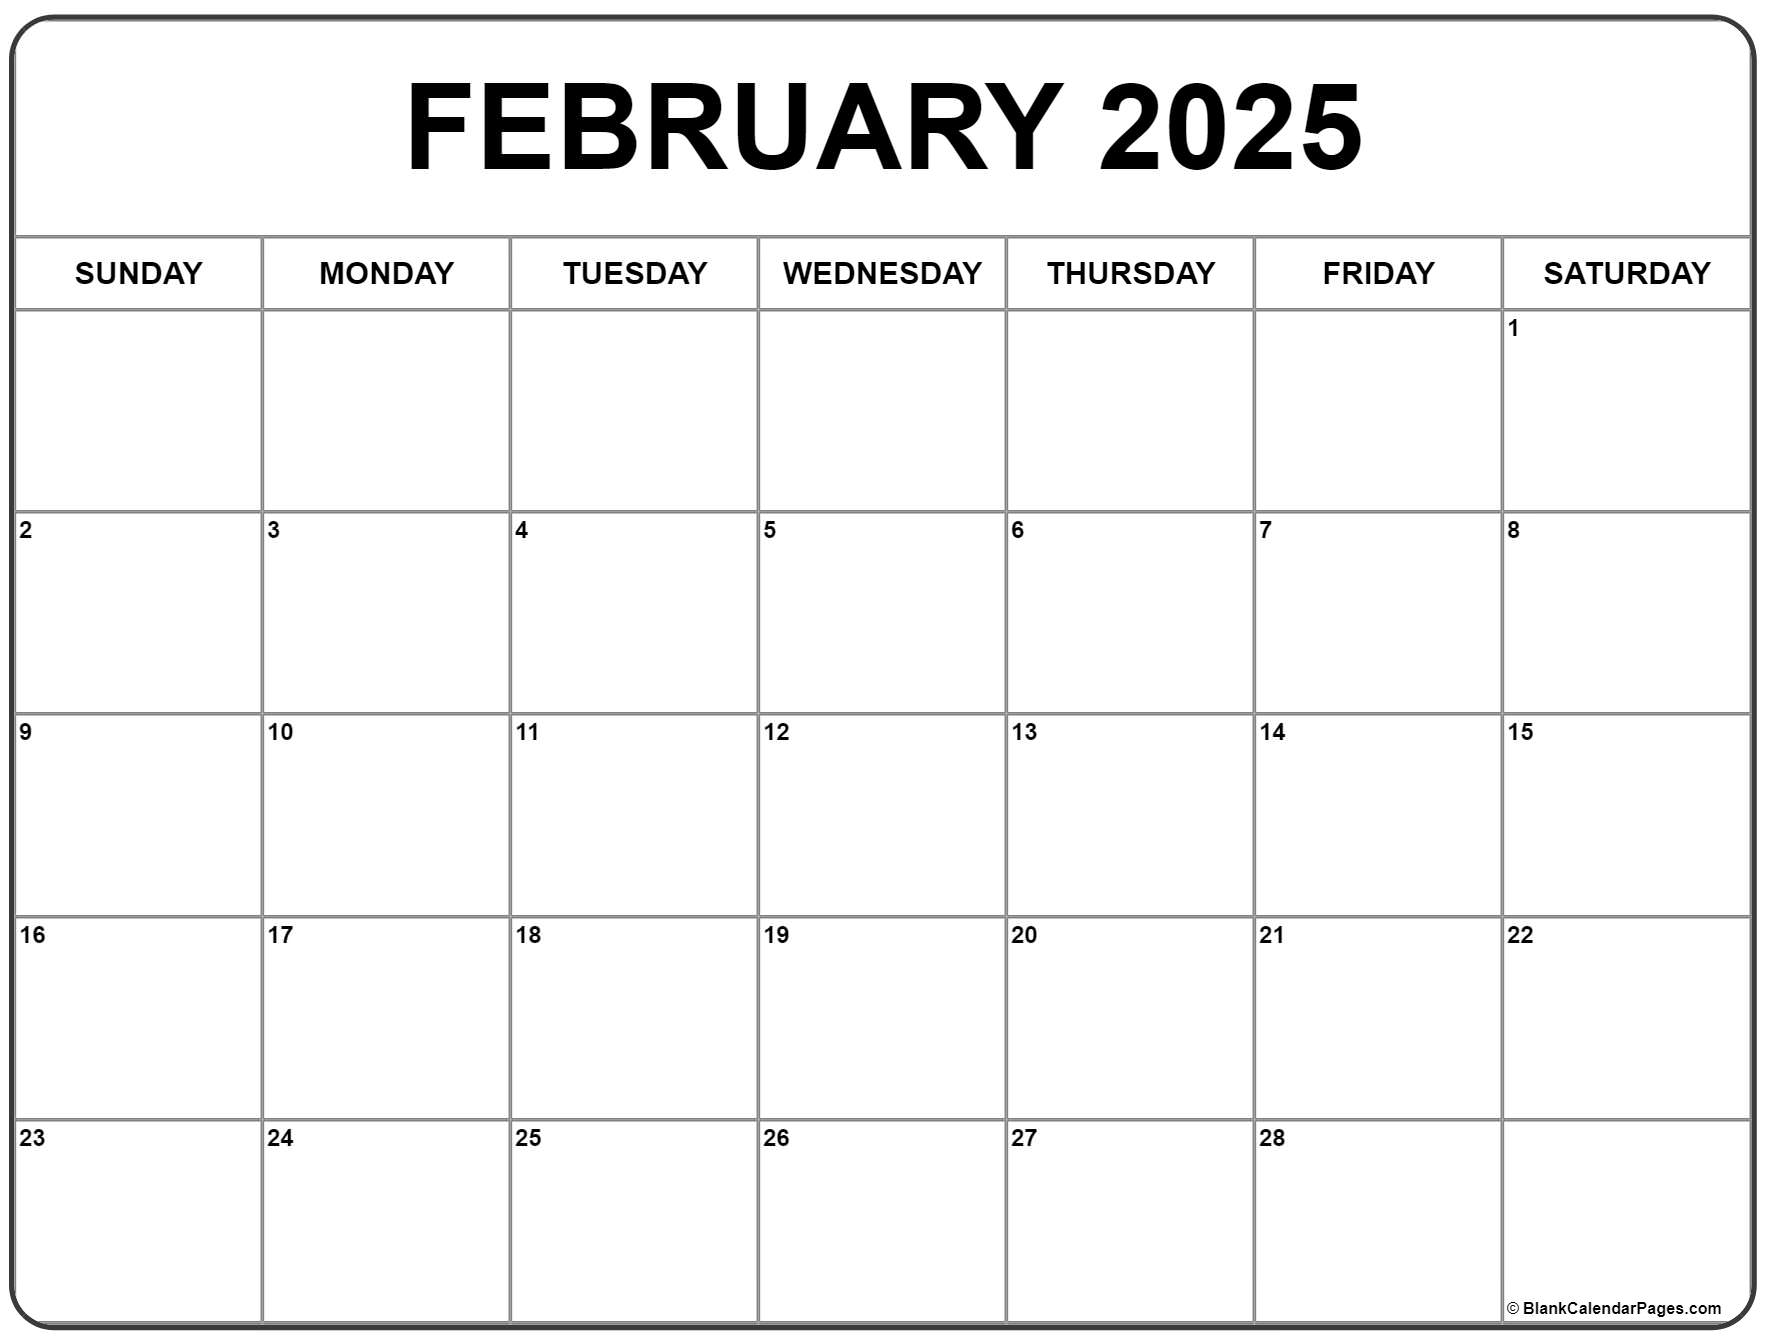 a-calendar-for-the-month-of-february-with-holidays-in-english-and